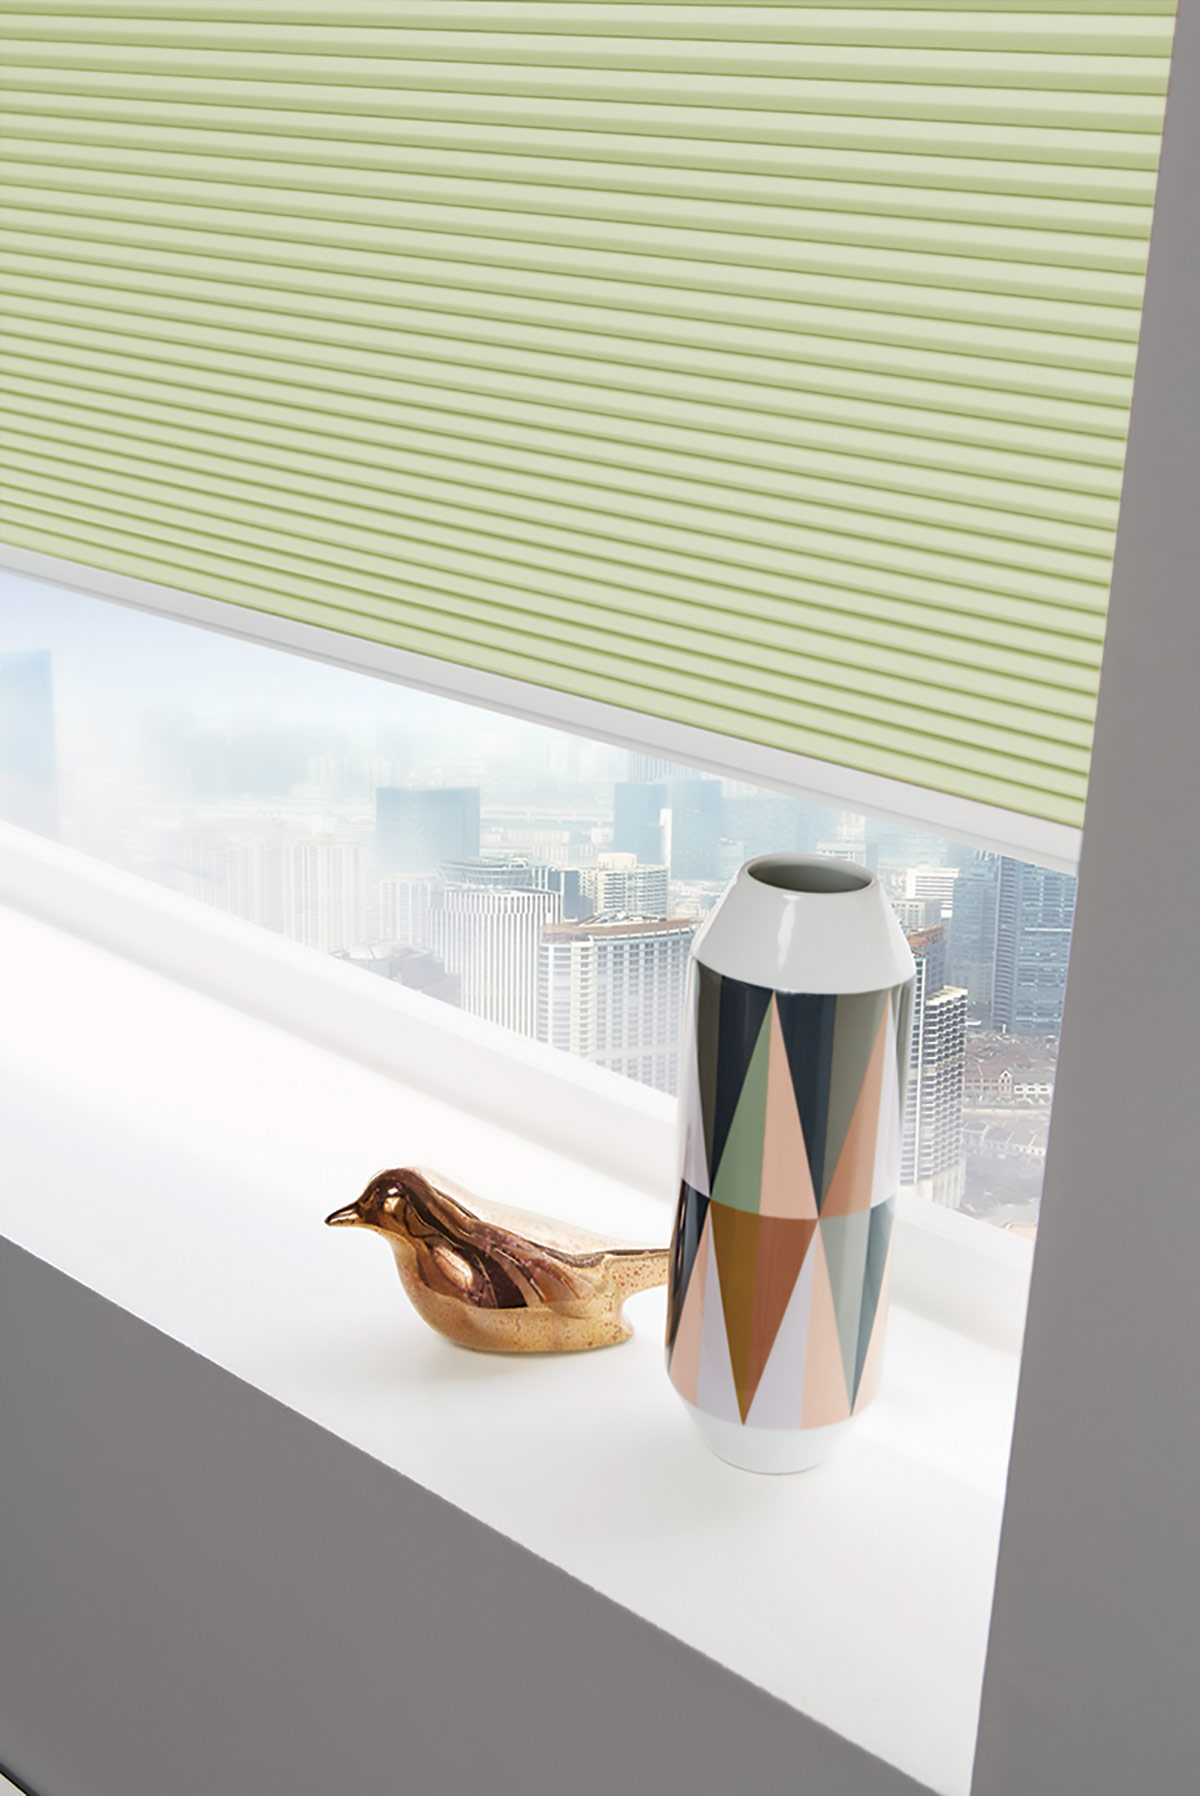 Darby Pistachio Honeycomb Blinds